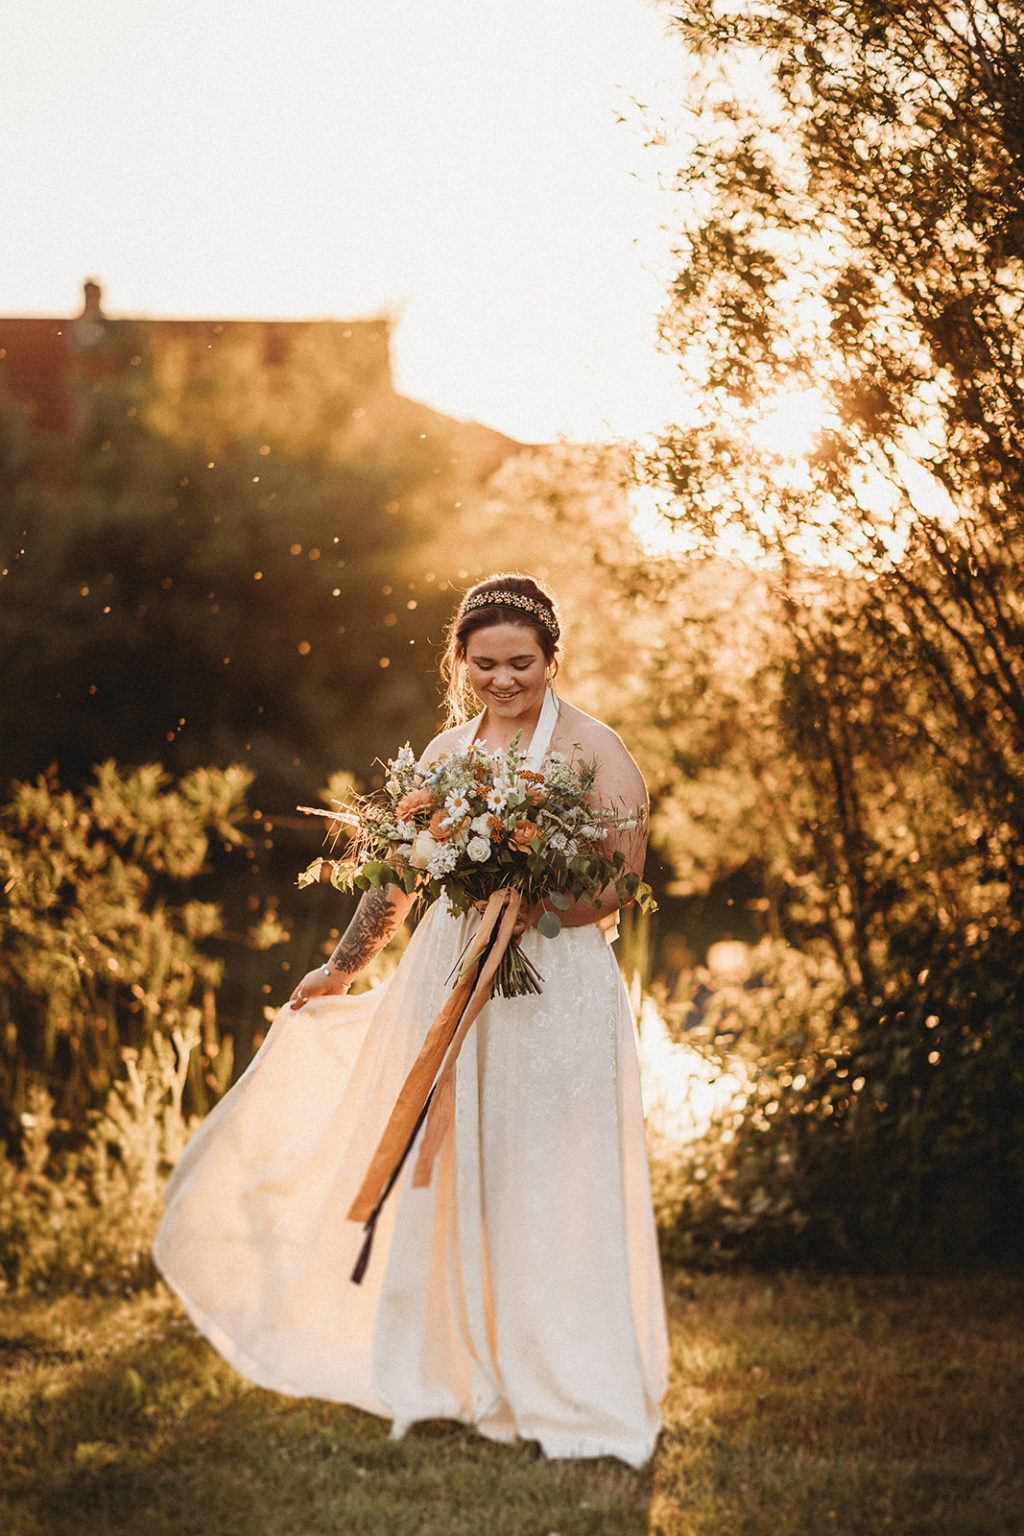 Sustainable Wedding By Twilight At The Jetty, Bedfordshire